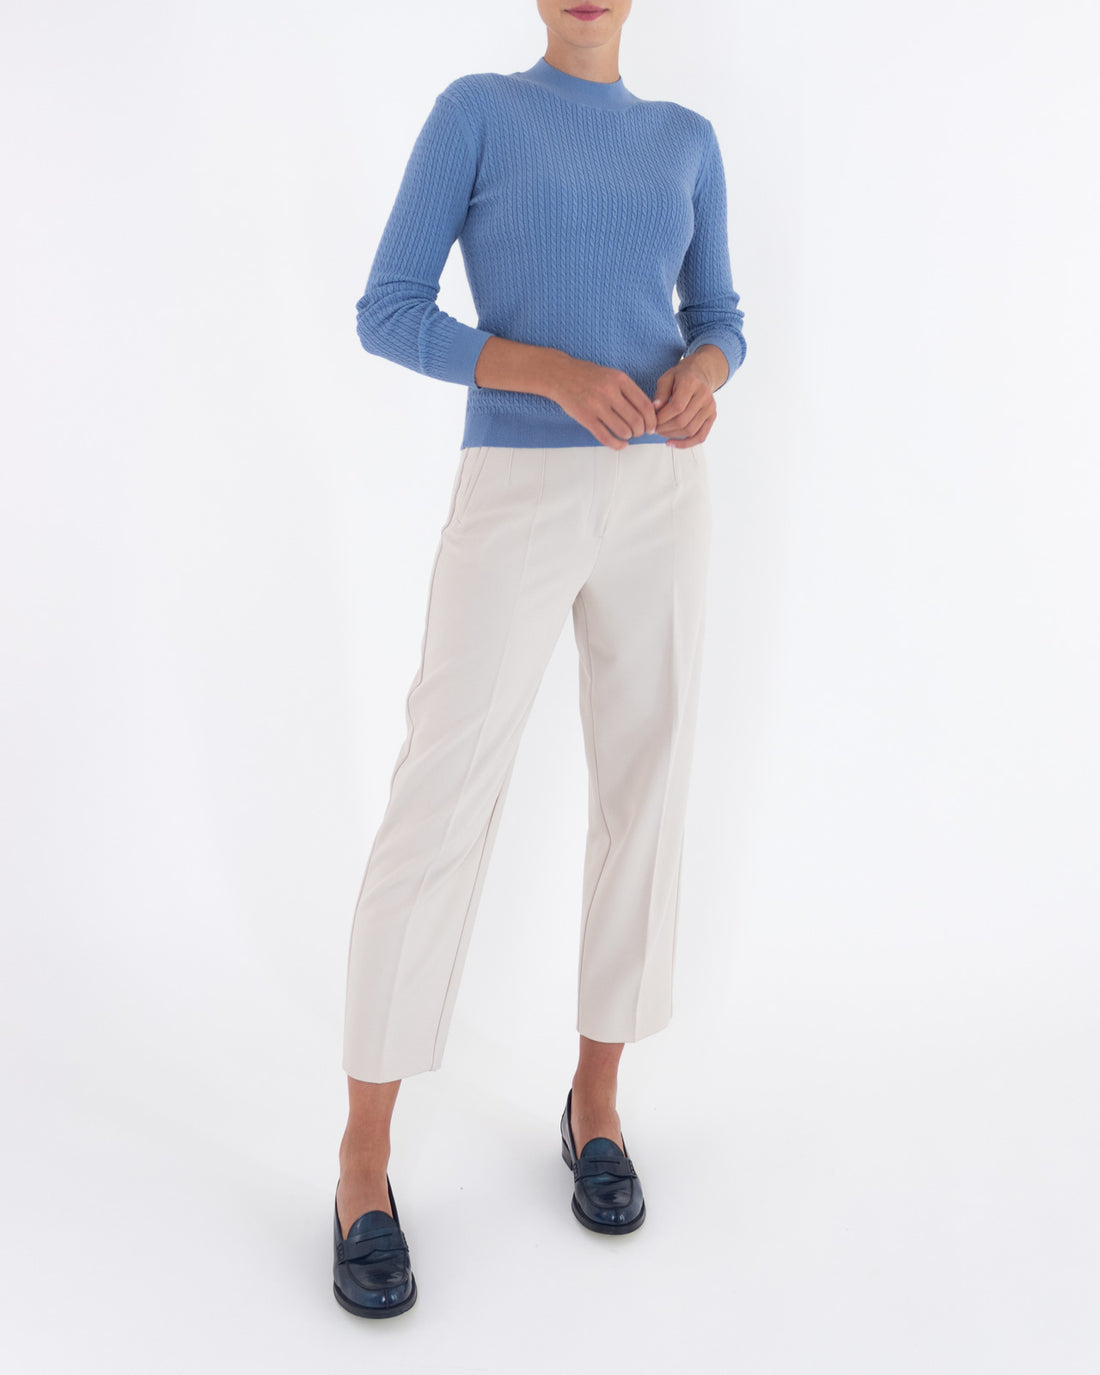 Tight-fitting sweater - Emme Marella